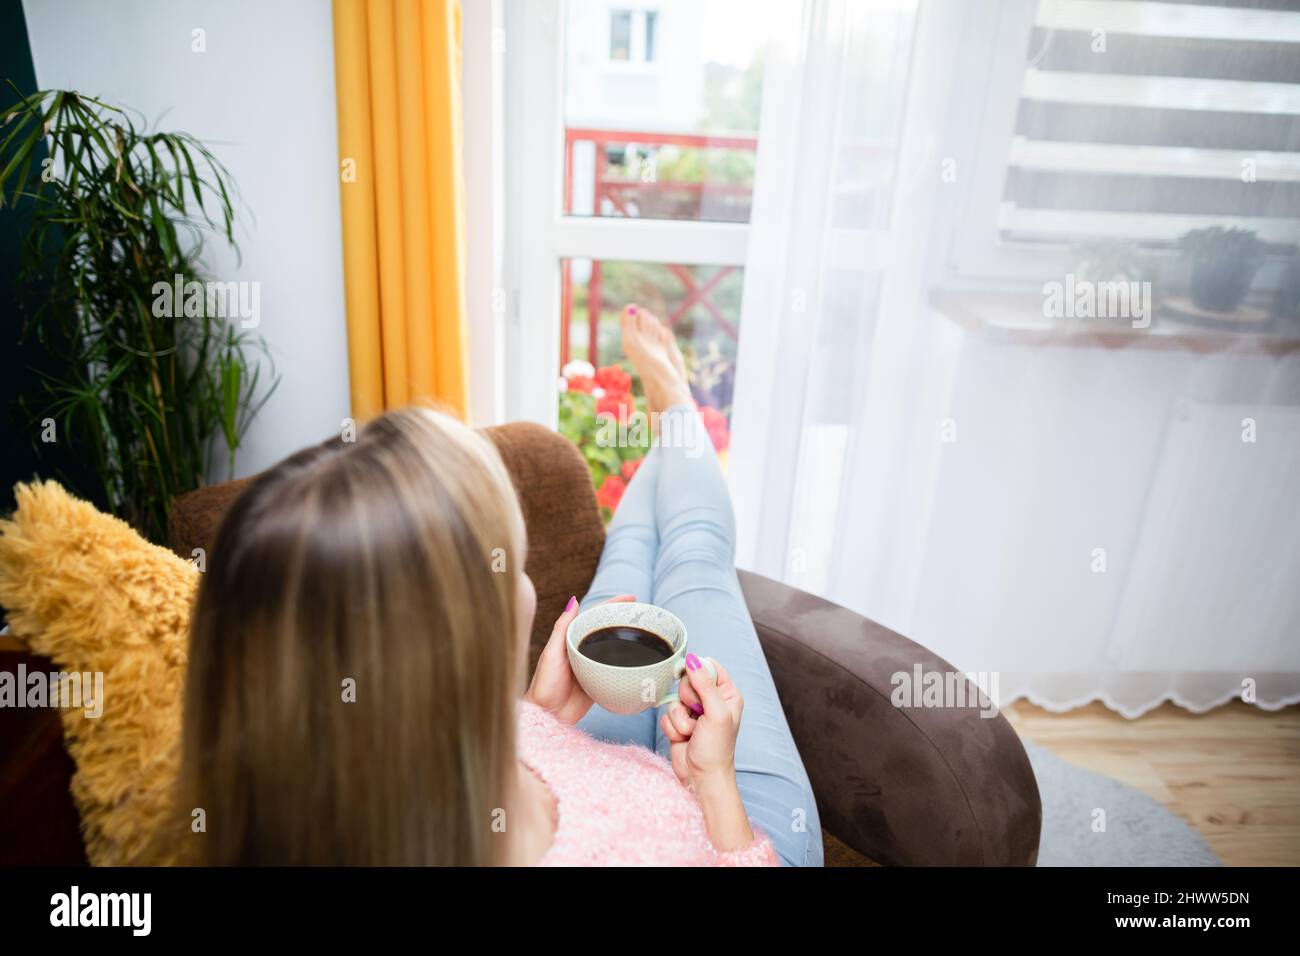 Relax with an aromatic coffee after a hard day at work. Stock Photo